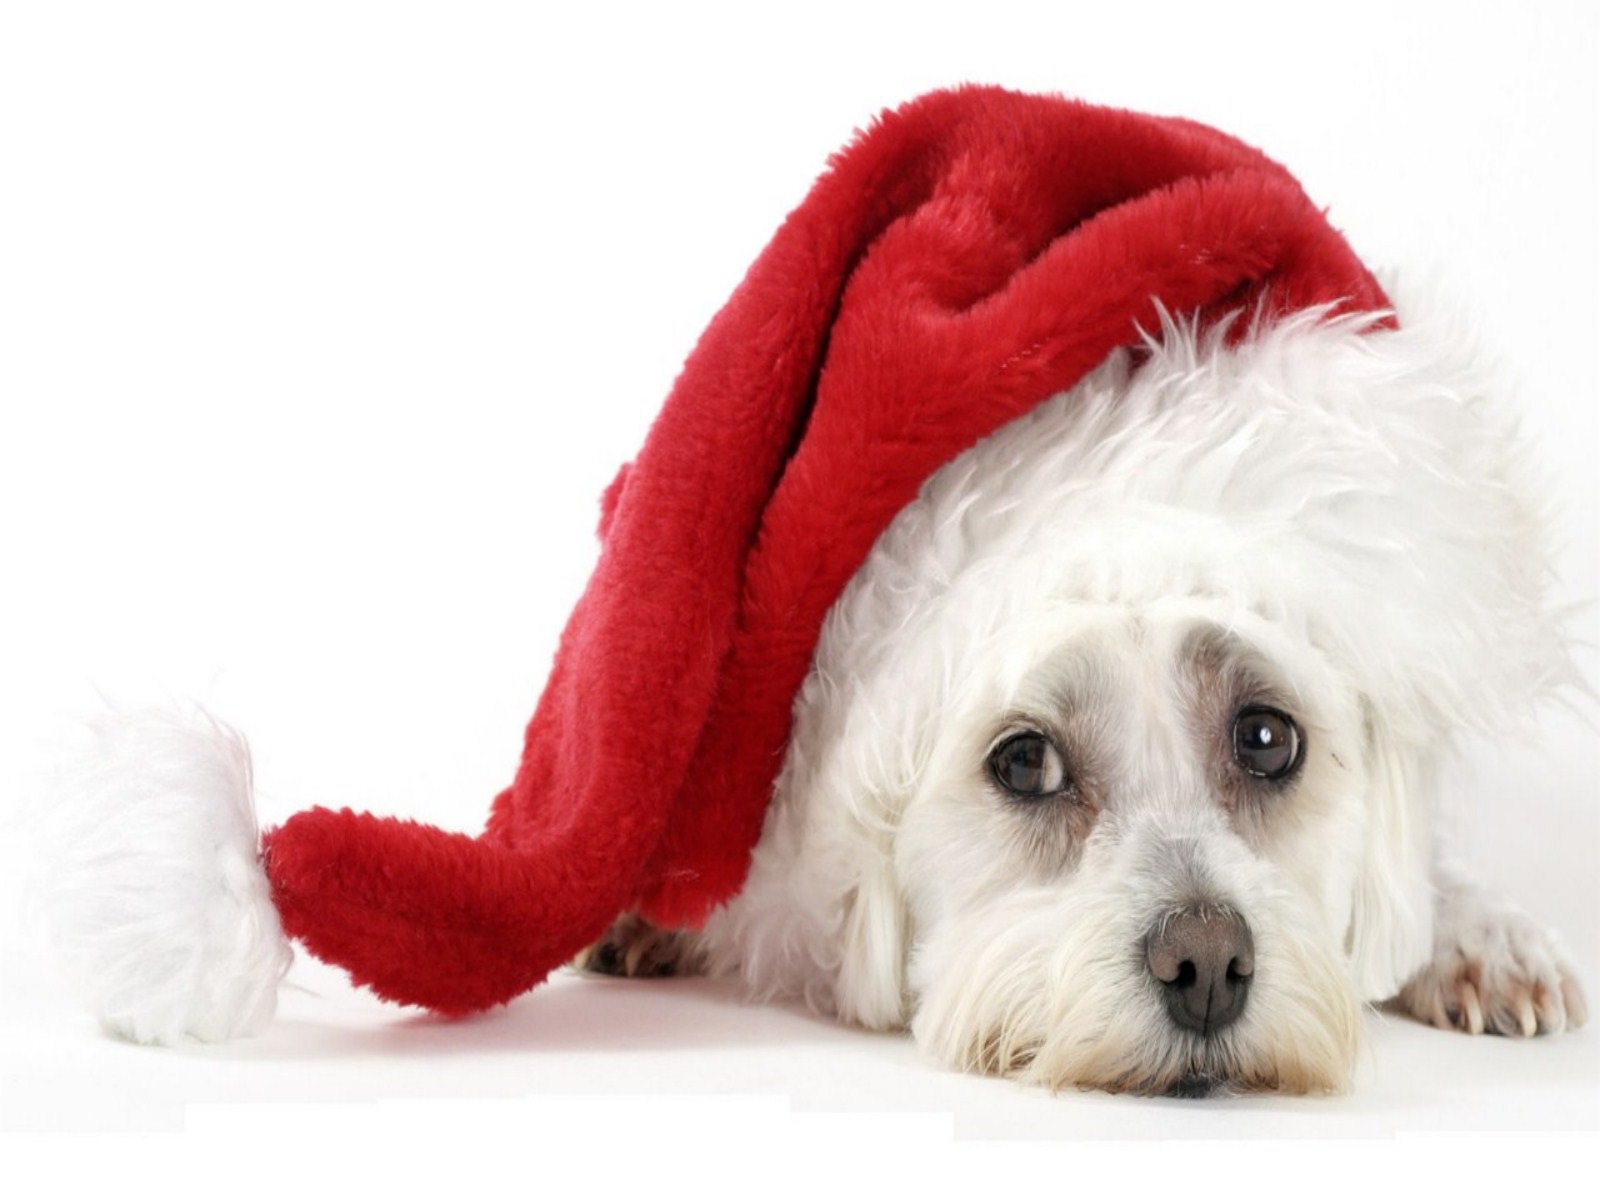 Christmas Puppy Wallpaper Ing Gallery